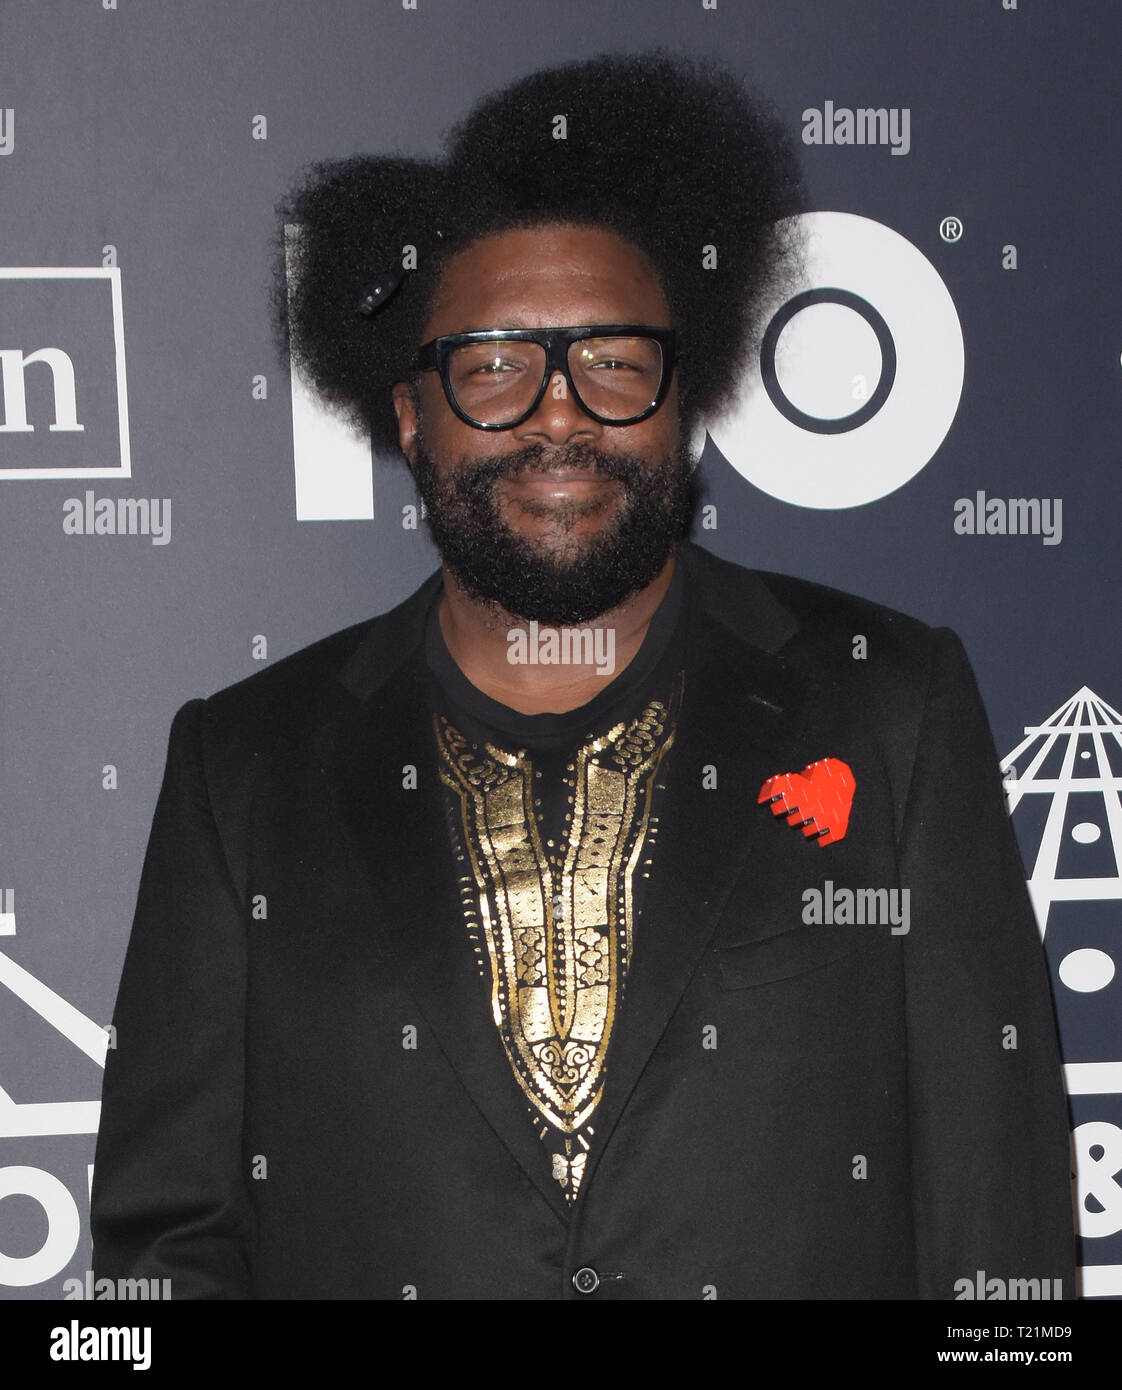 NEW YORK, NEW YORK - 29. März: Questlove besucht die 2019 Rock and Roll Hall Of Fame Induction Ceremony bei Barclays Center am 29. März 2019 in New York City. Foto: imageSPACE/MediaPunch Stockfoto